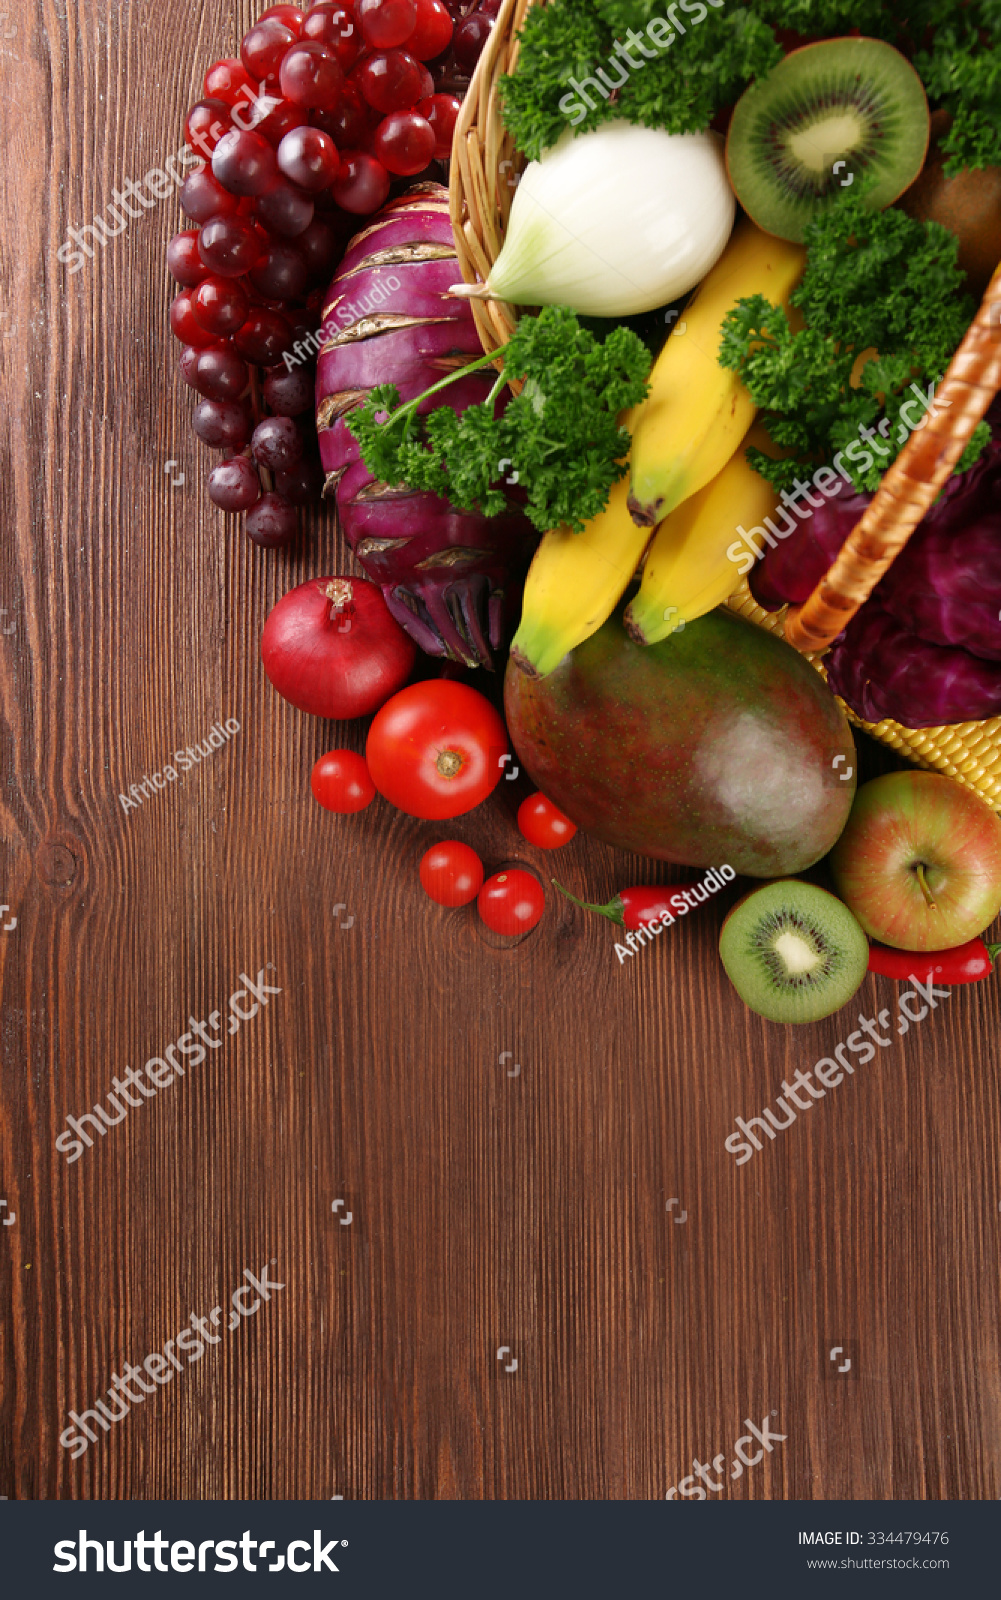 A set of fruit and vegetables in a basket on wooden background #334479476